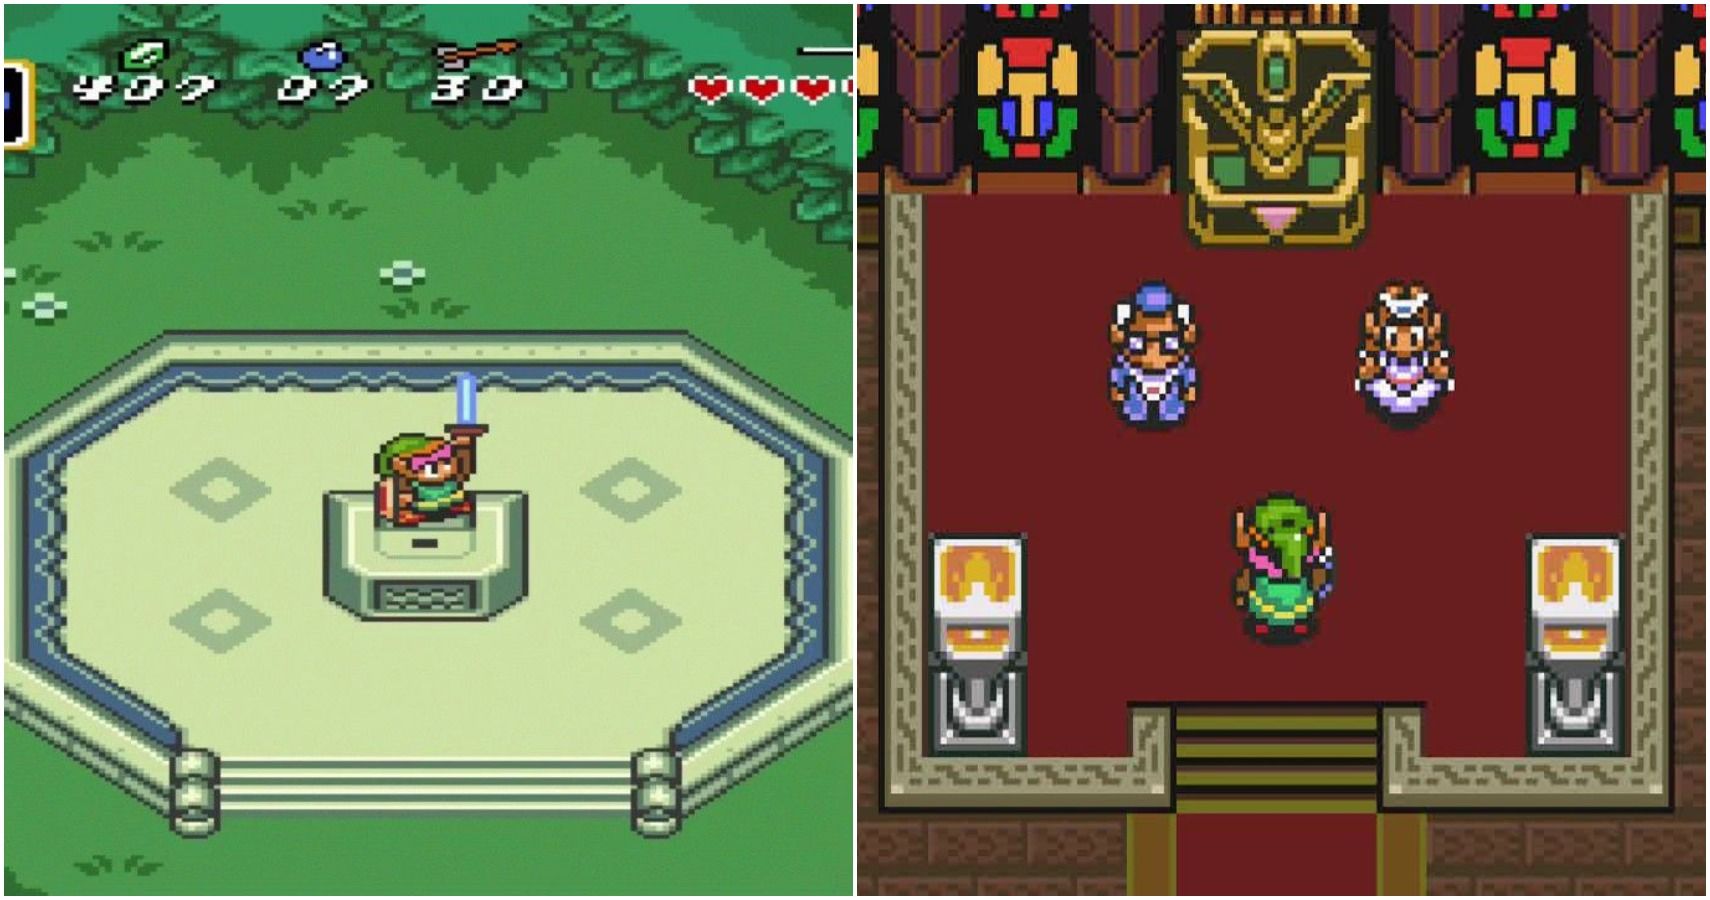 extra-quality-legend-of-zelda-a-link-to-the-past-rom-ita-coub